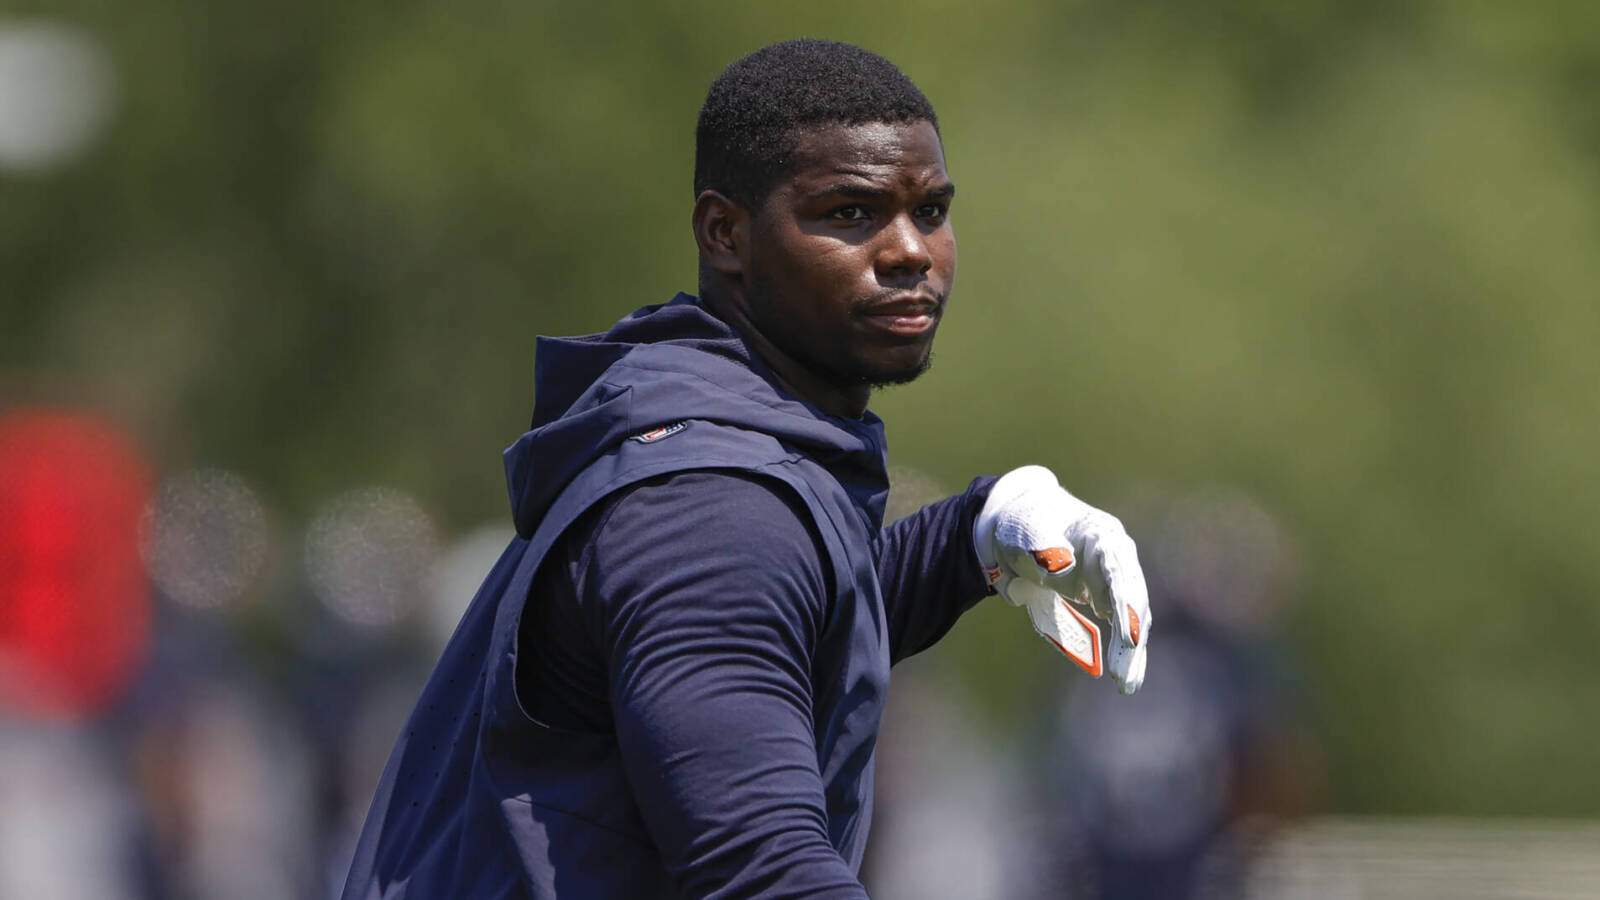 Former Bears RB Tarik Cohen ruptures Achilles after missing 2021 with torn MCL